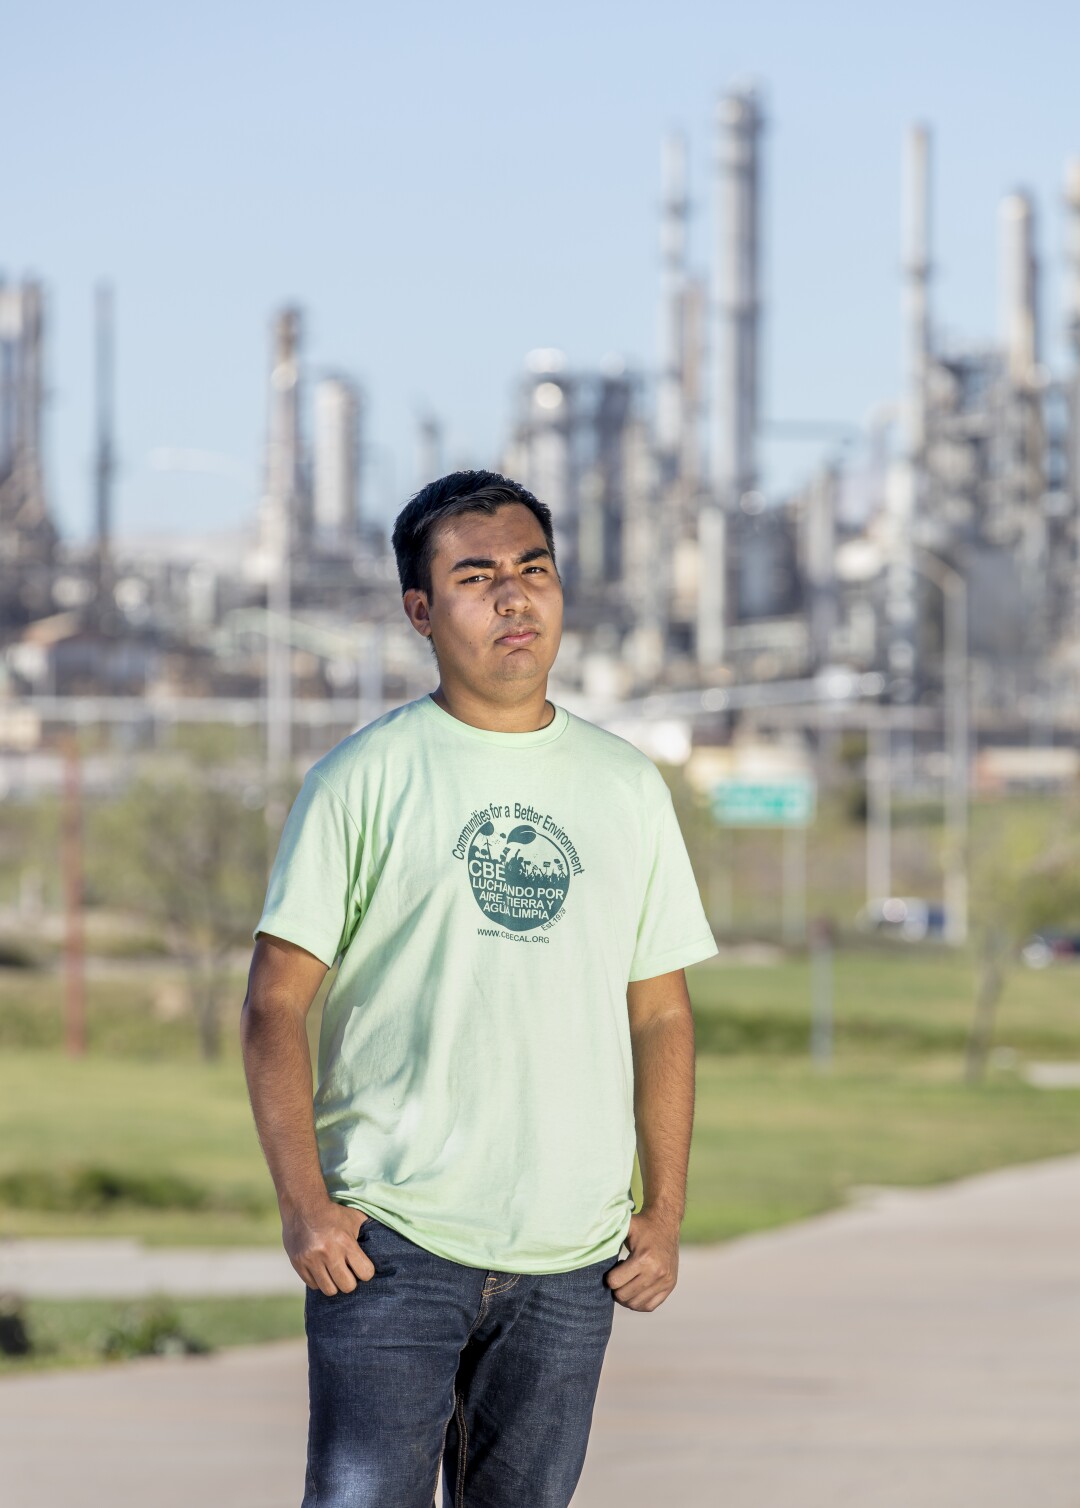 Luis Martinez poses for a portrait at the Wilmington Waterfront Park in Wilmington, Calif.